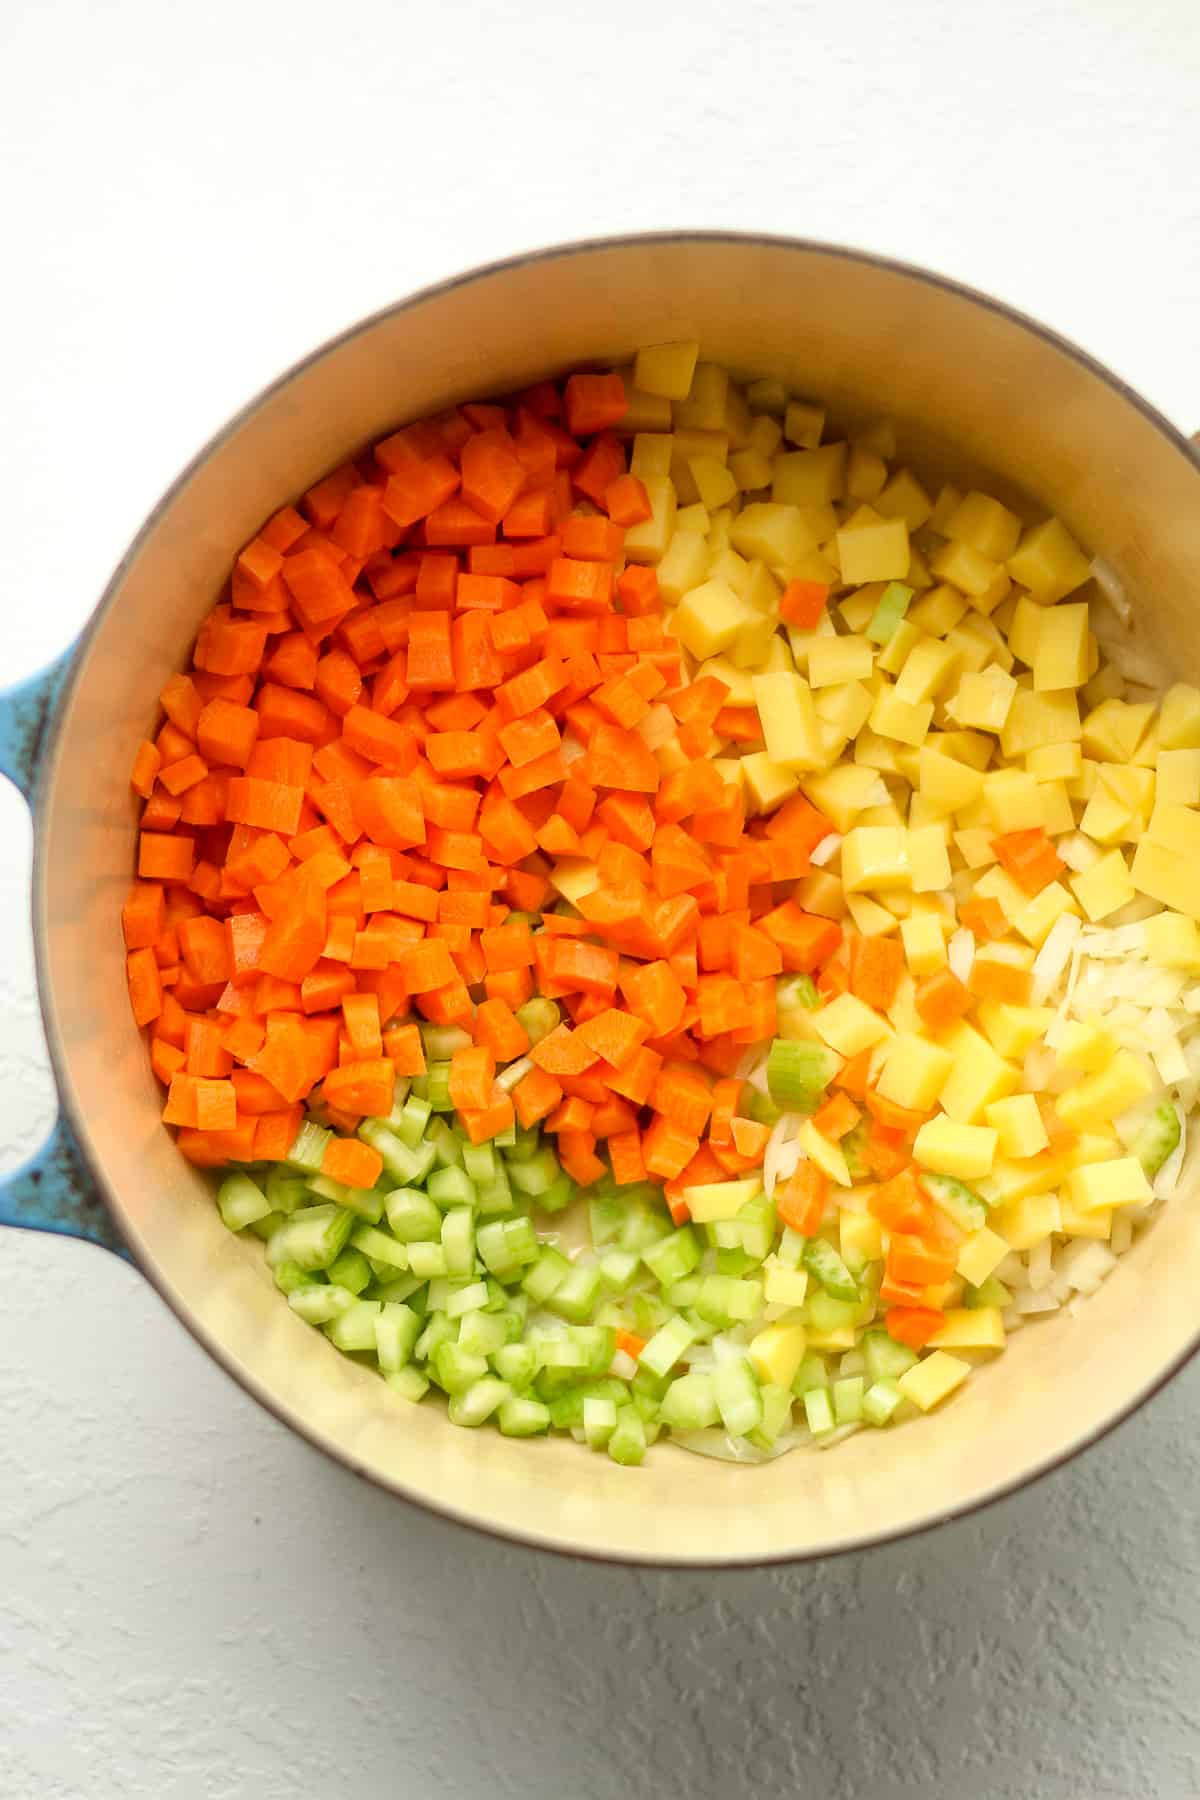 The diced veggies in the stock pot.